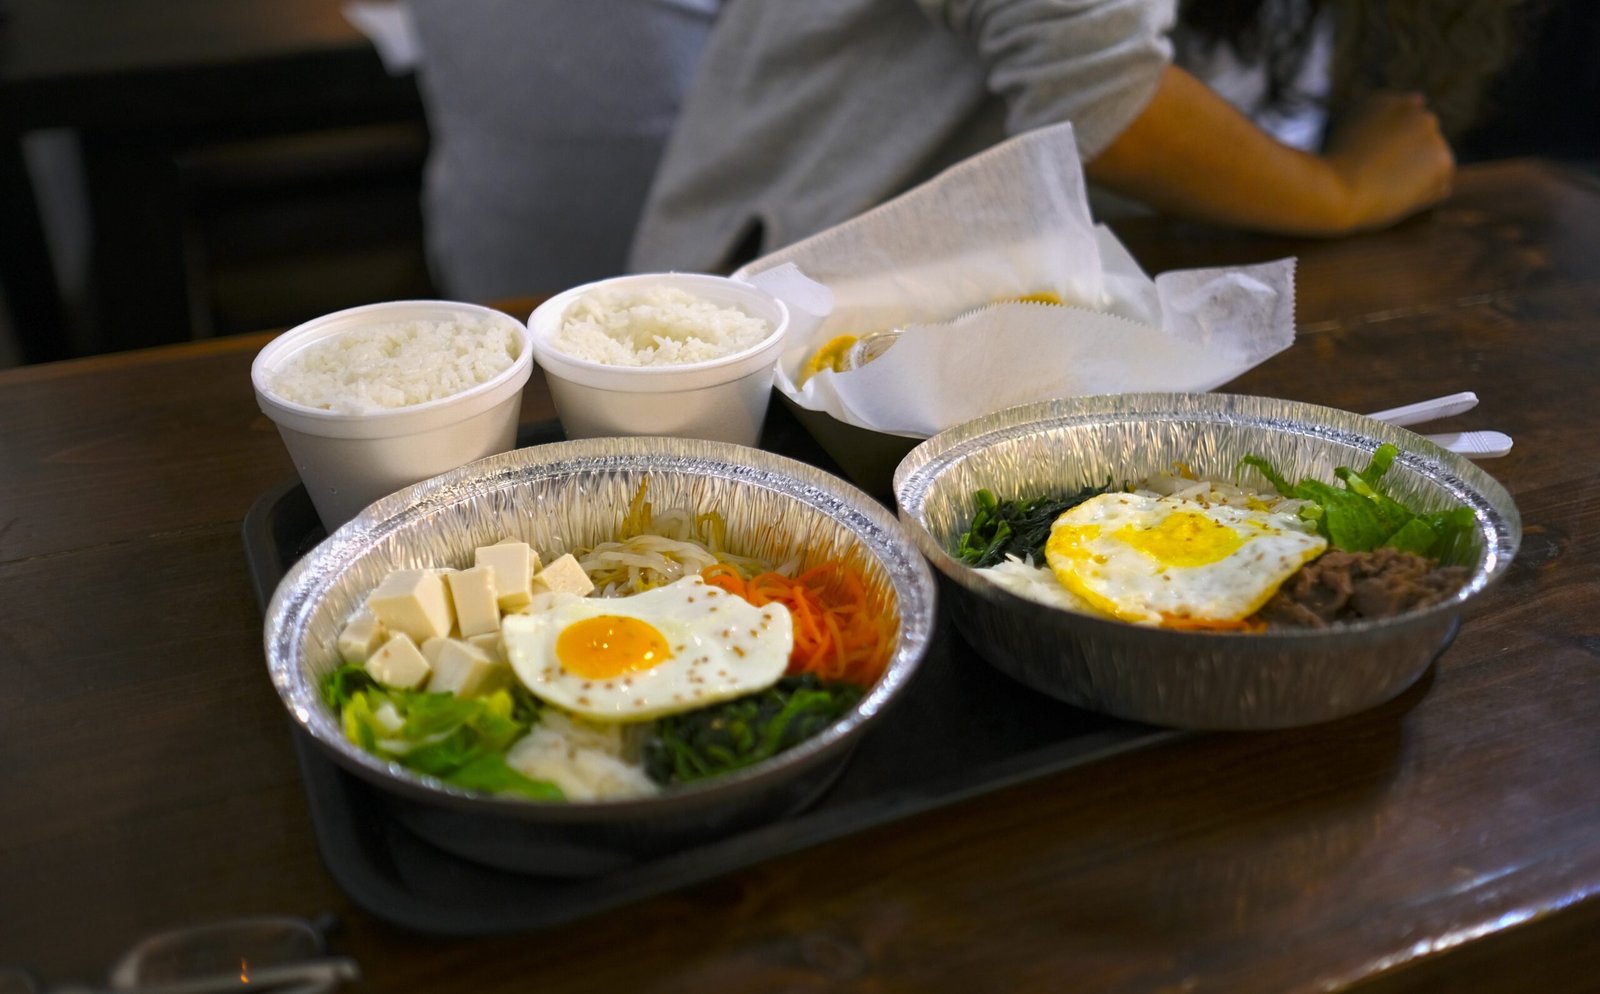 How Do You Fuse Korean And International Cuisines In A Single Dish?